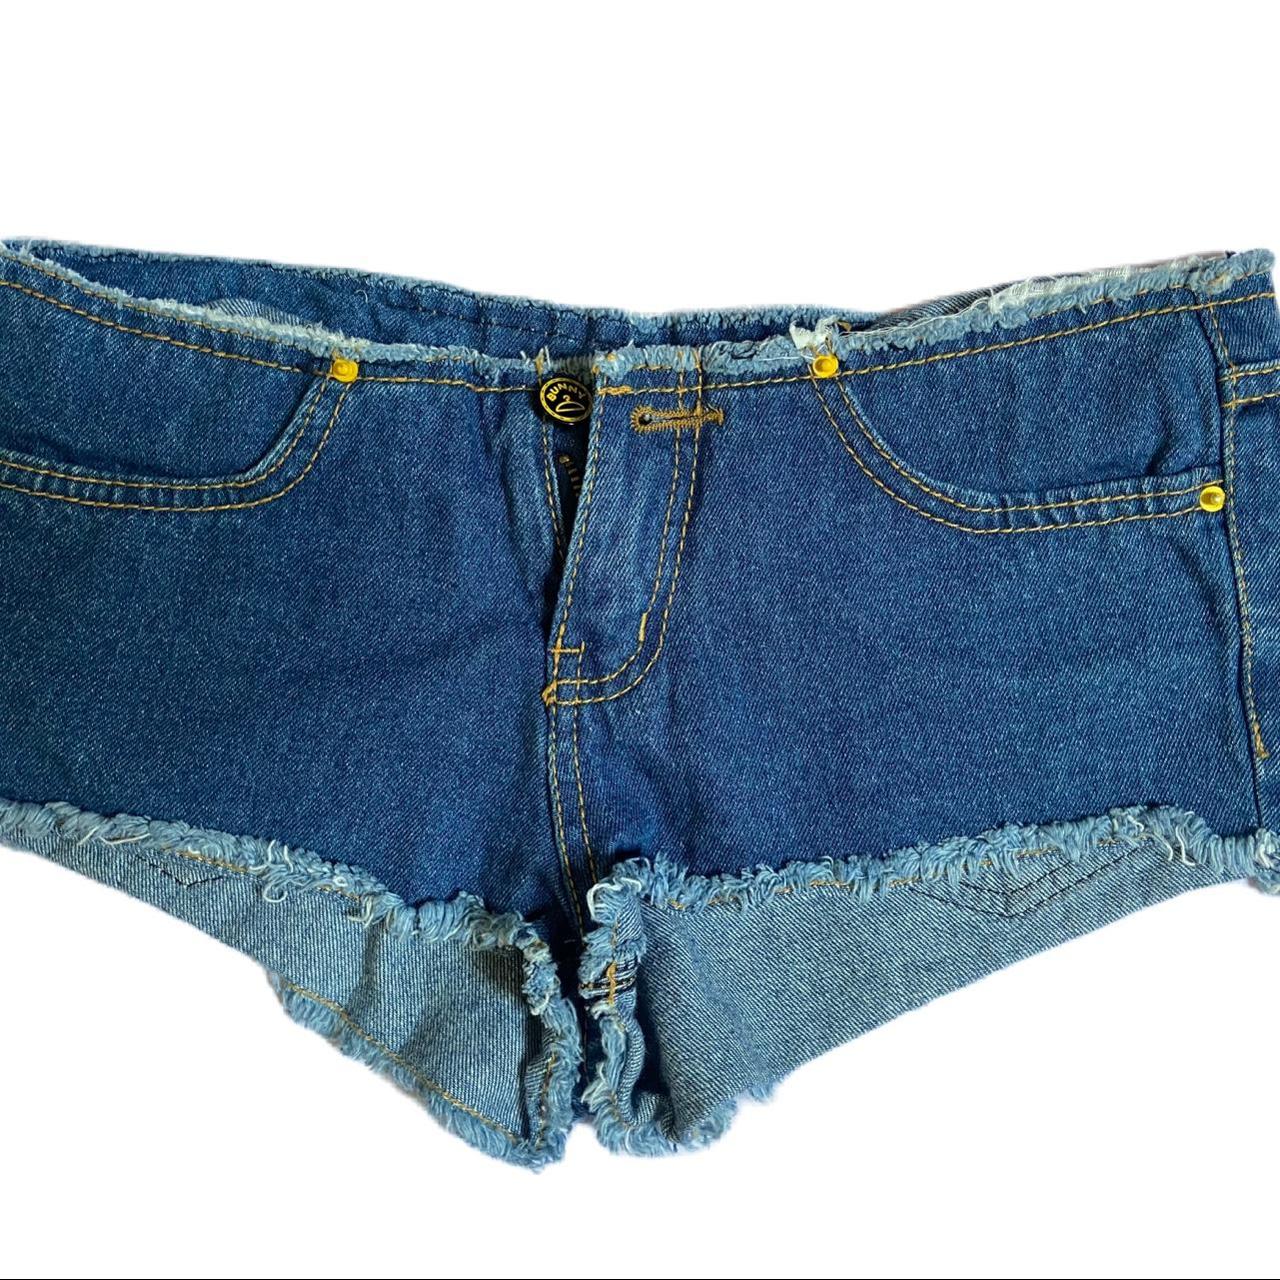 Buy Plus Size Women Pure Denim Hot Pants (Shorts) - HIGH Rise - Faded Ice  Blue Color - Heavy Rugged/Distressed - Non Stretch Fabric - Waist Size  28